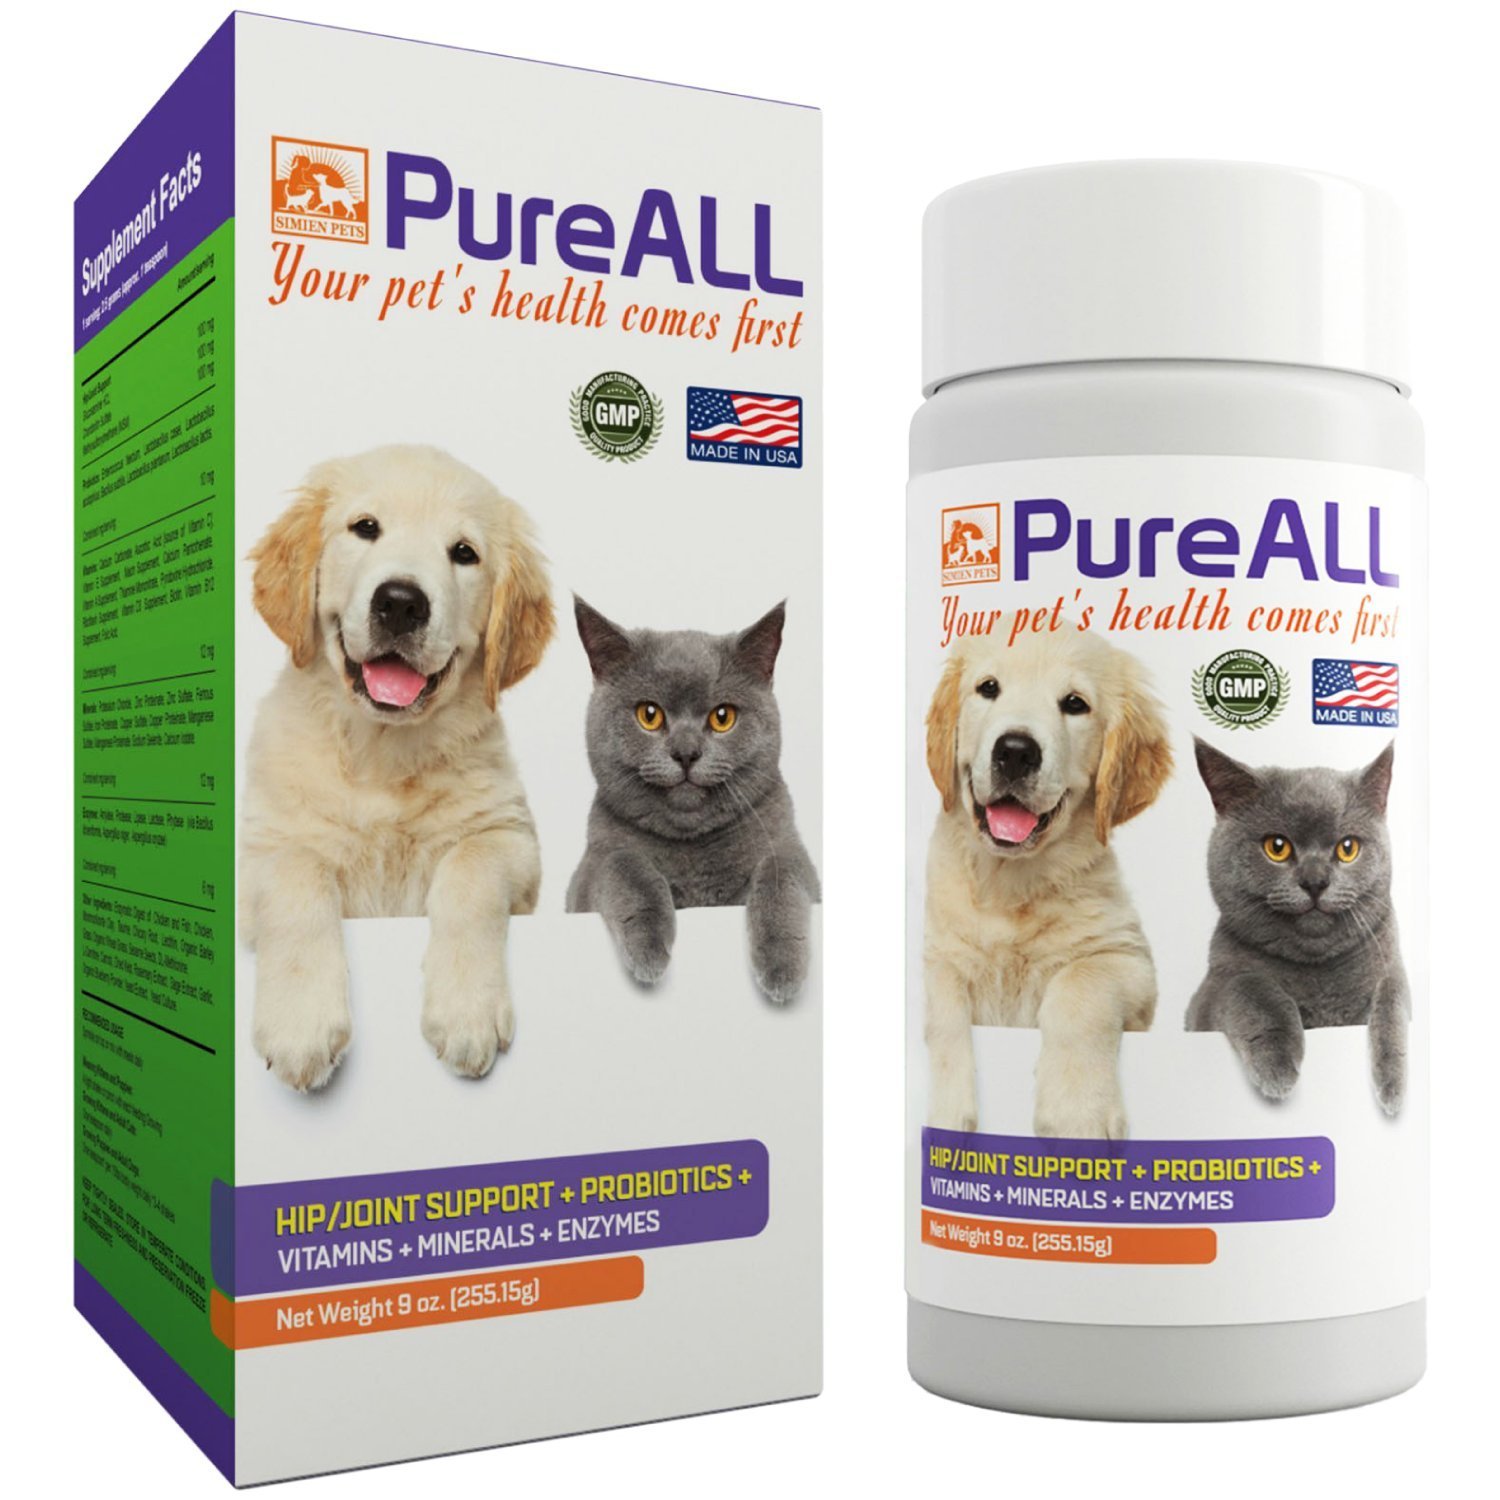 All-In-One Dog & Cat Probiotics, Hip Joint Pain Relief Formula, Vitamins, Digestive Enzymes, Antioxidants, 